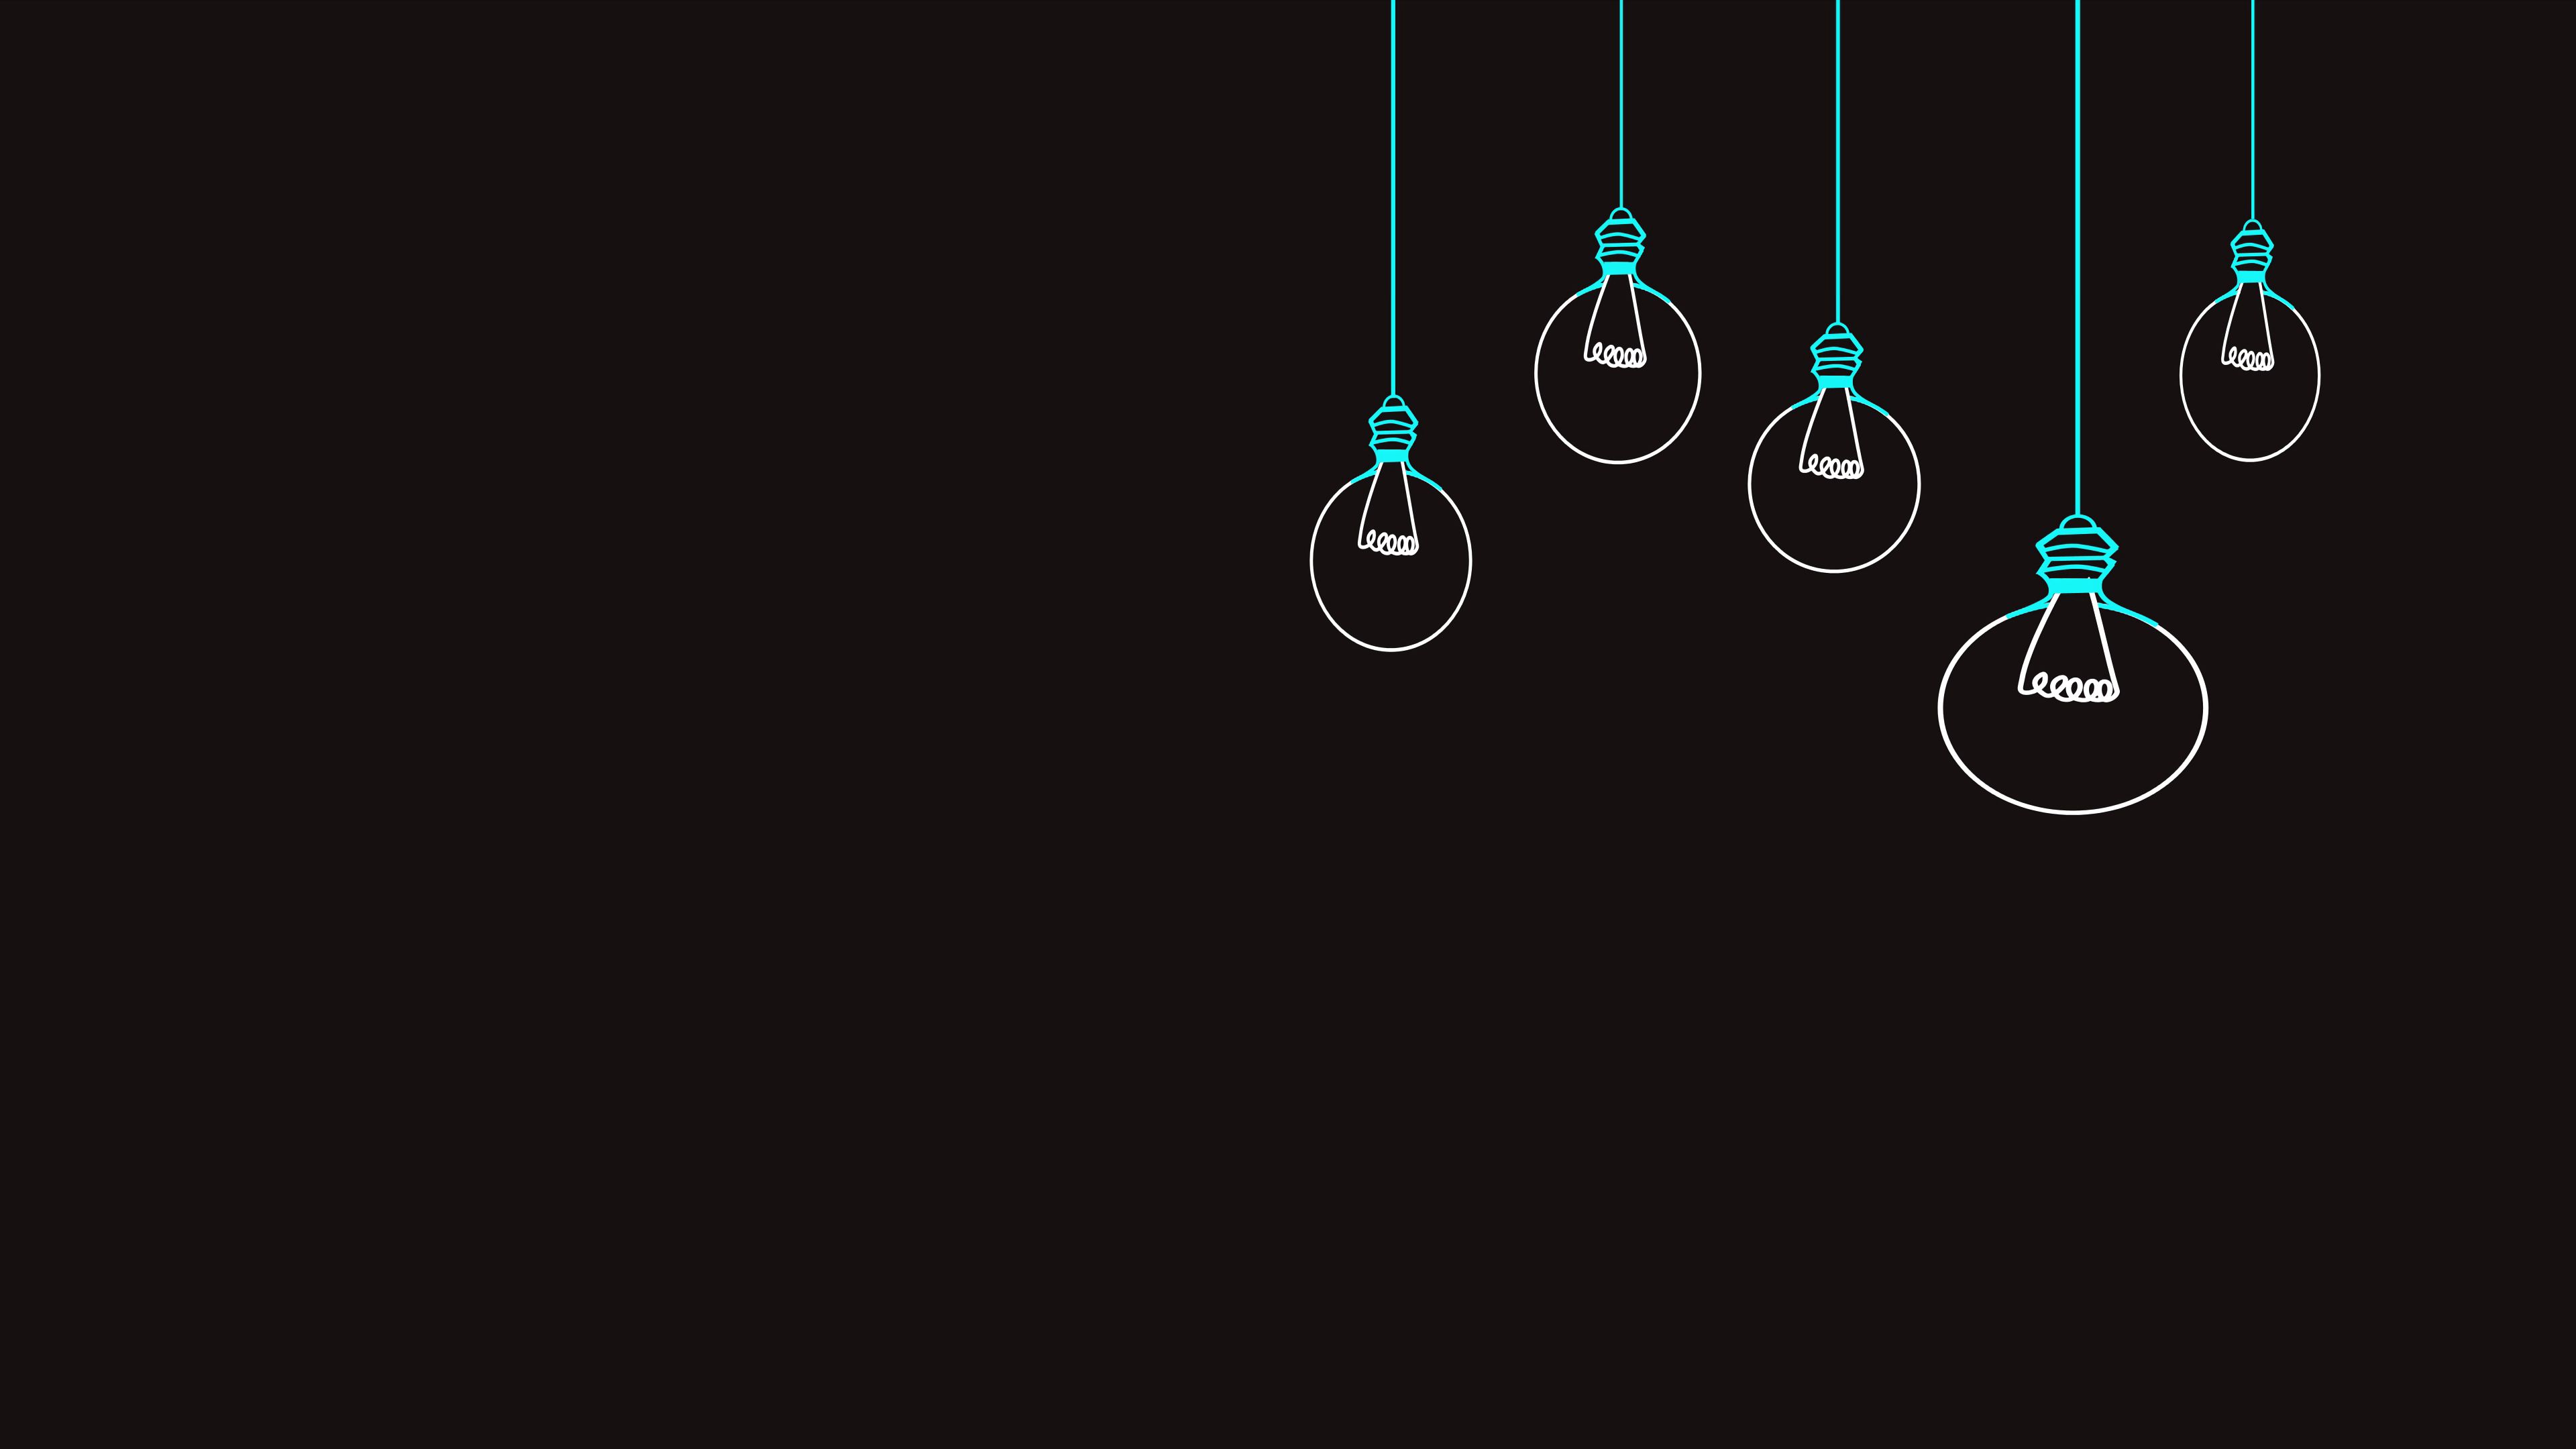 picture, vector, black background, minimalism, drawing, light bulbs